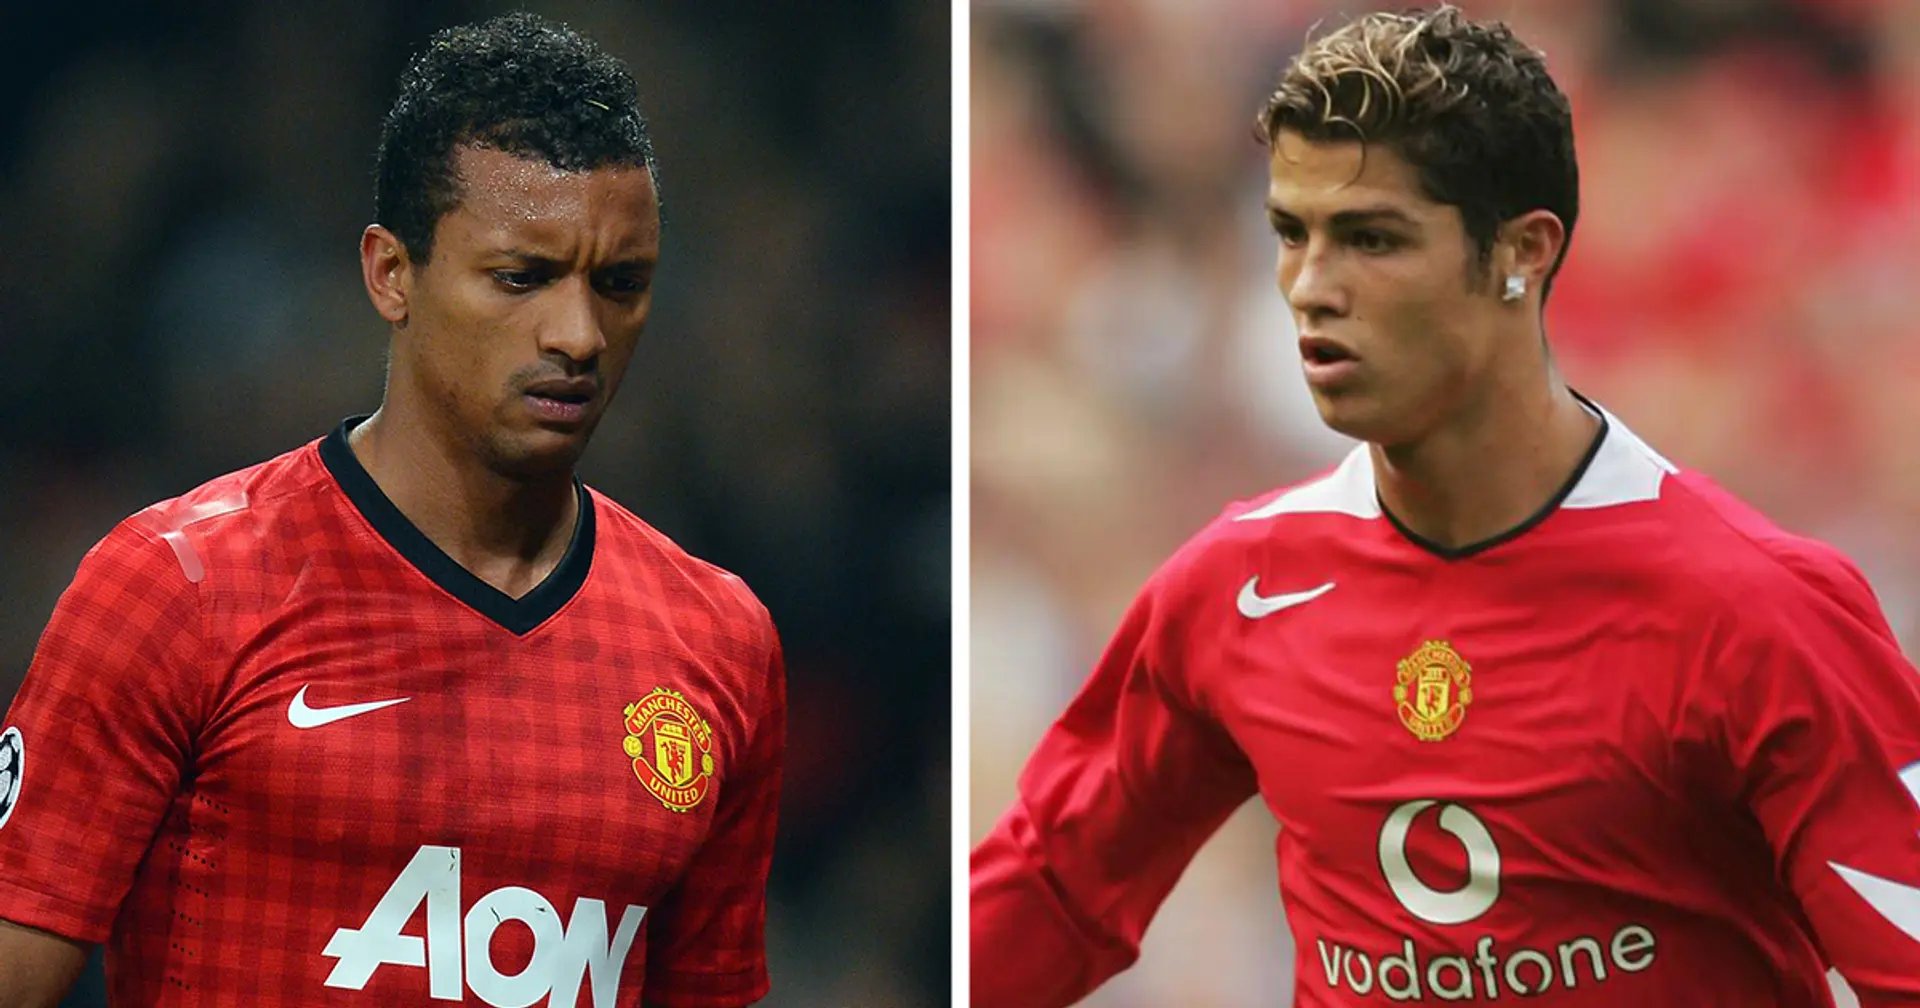 'Numbers don’t lie': Nani picks Cristiano Ronaldo as greatest player of all time